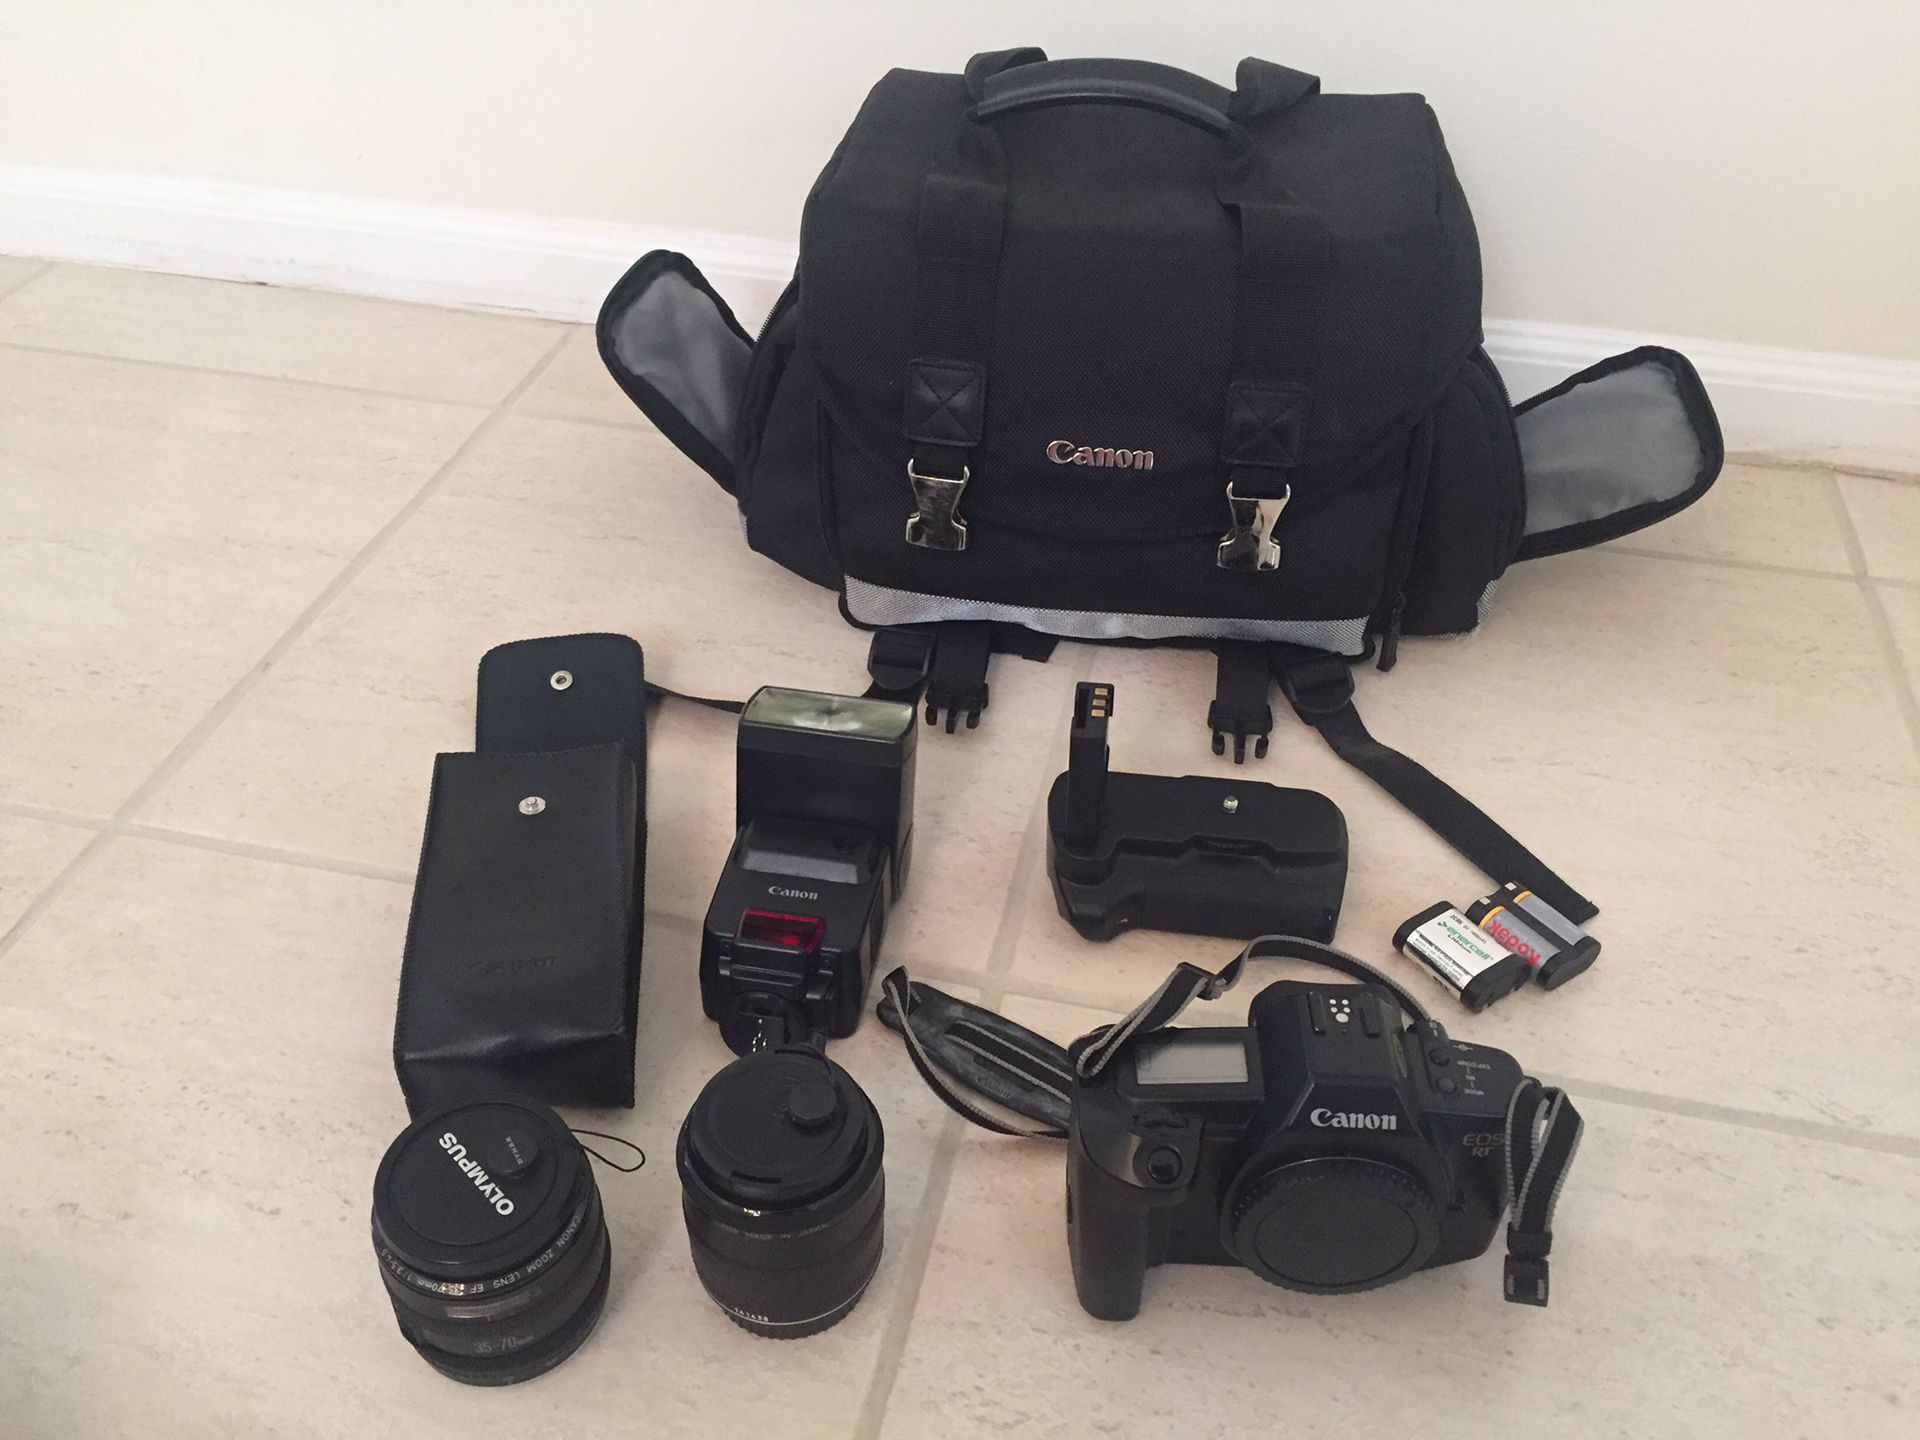 Canon EOS RT film camera with 2 lenses, extra life battery pack, camera case, 2 lithium batteries, and a speedlite 430 EZ light